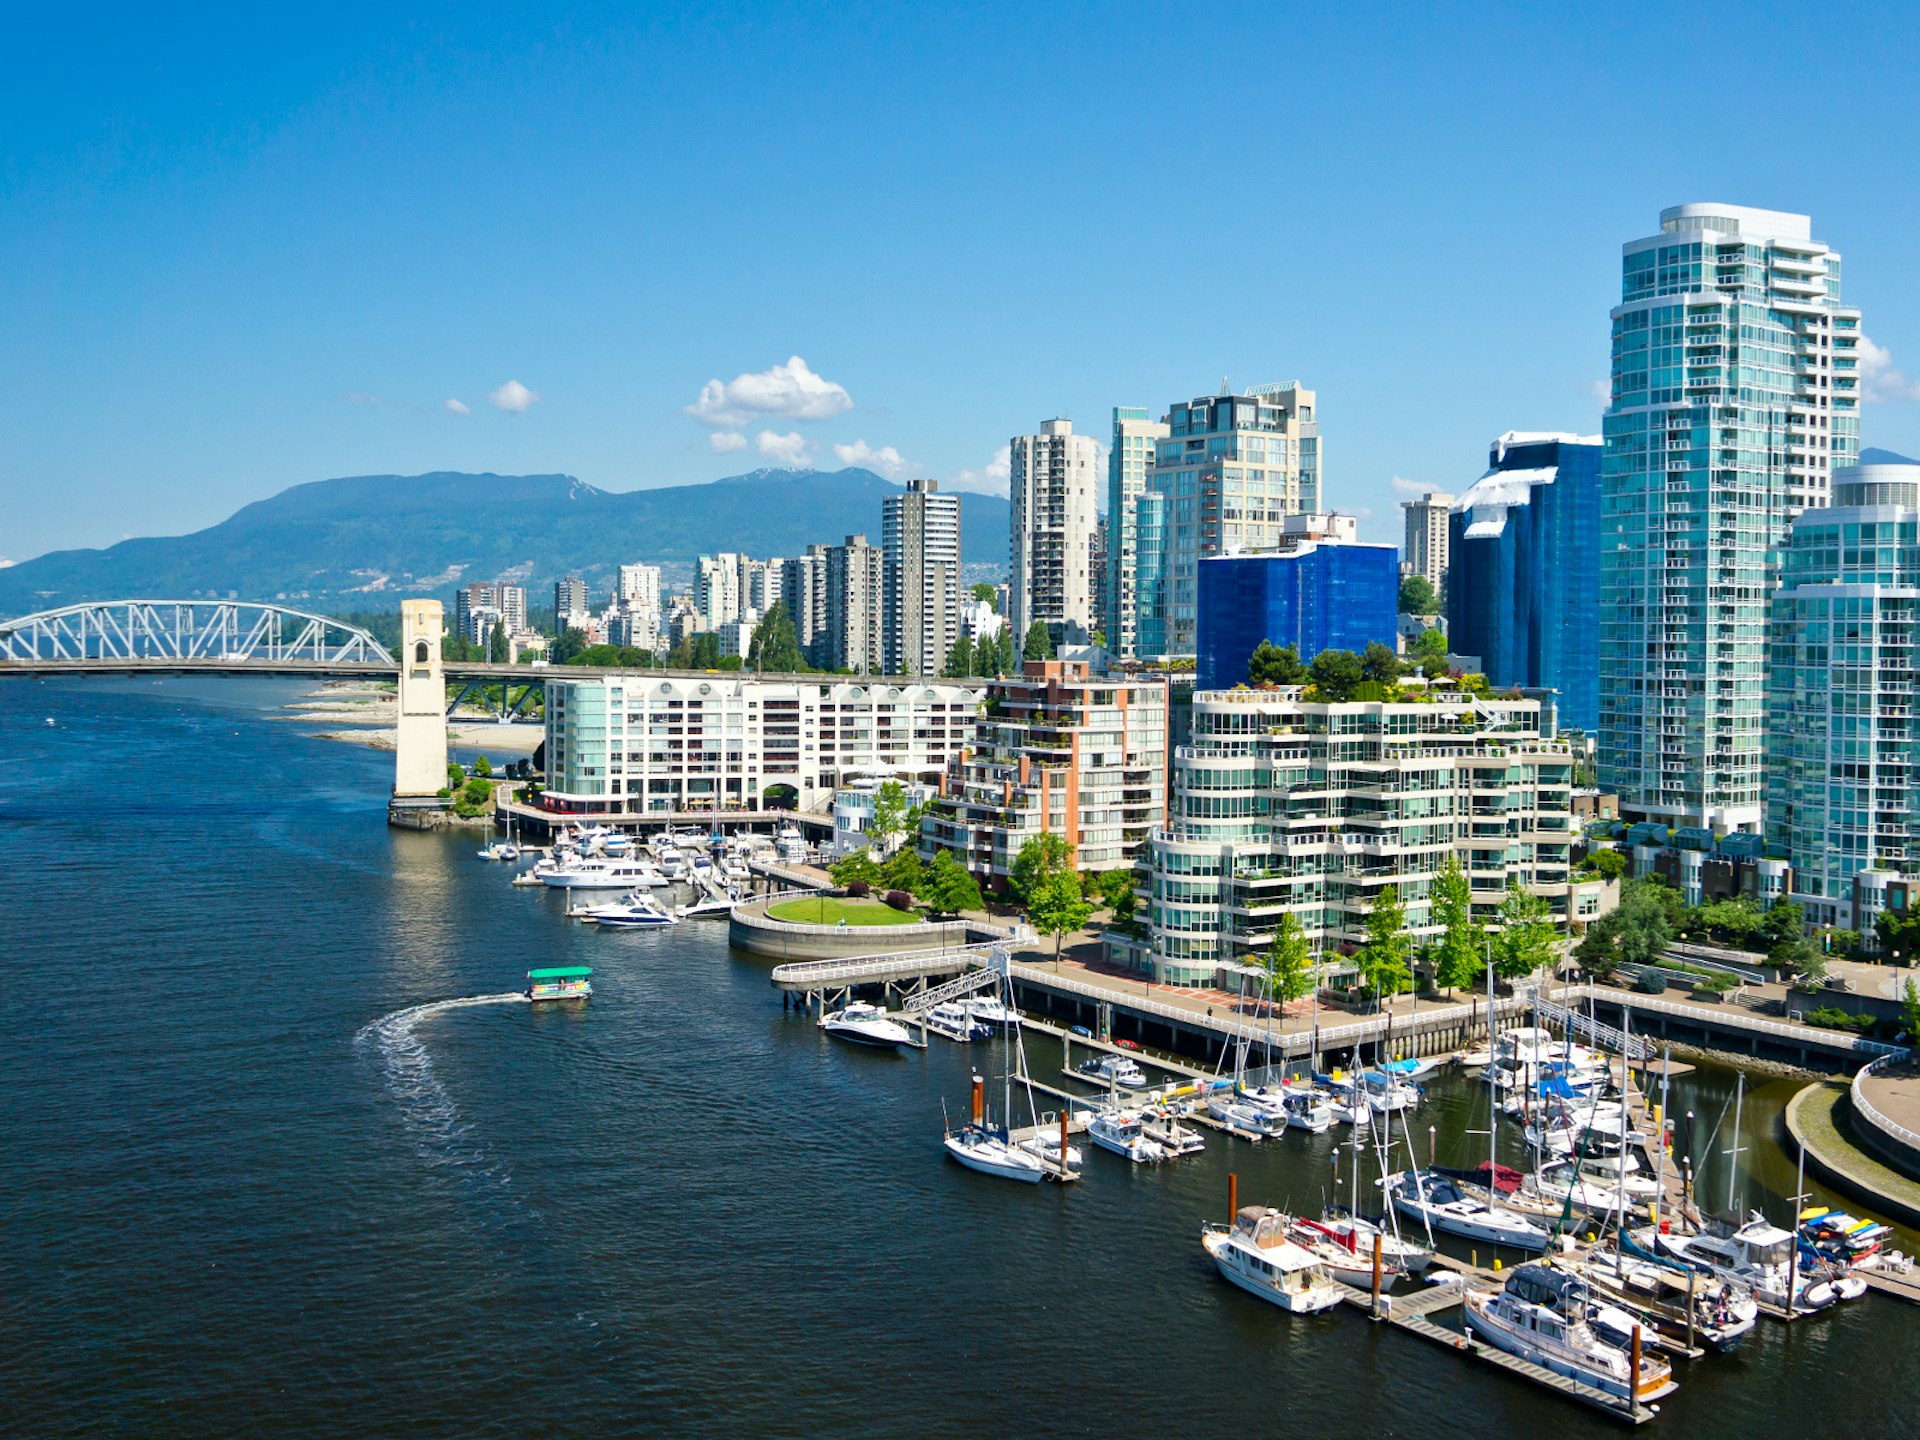 The skyline of Vancouver, Vancouver © mffoto / Shutterstock